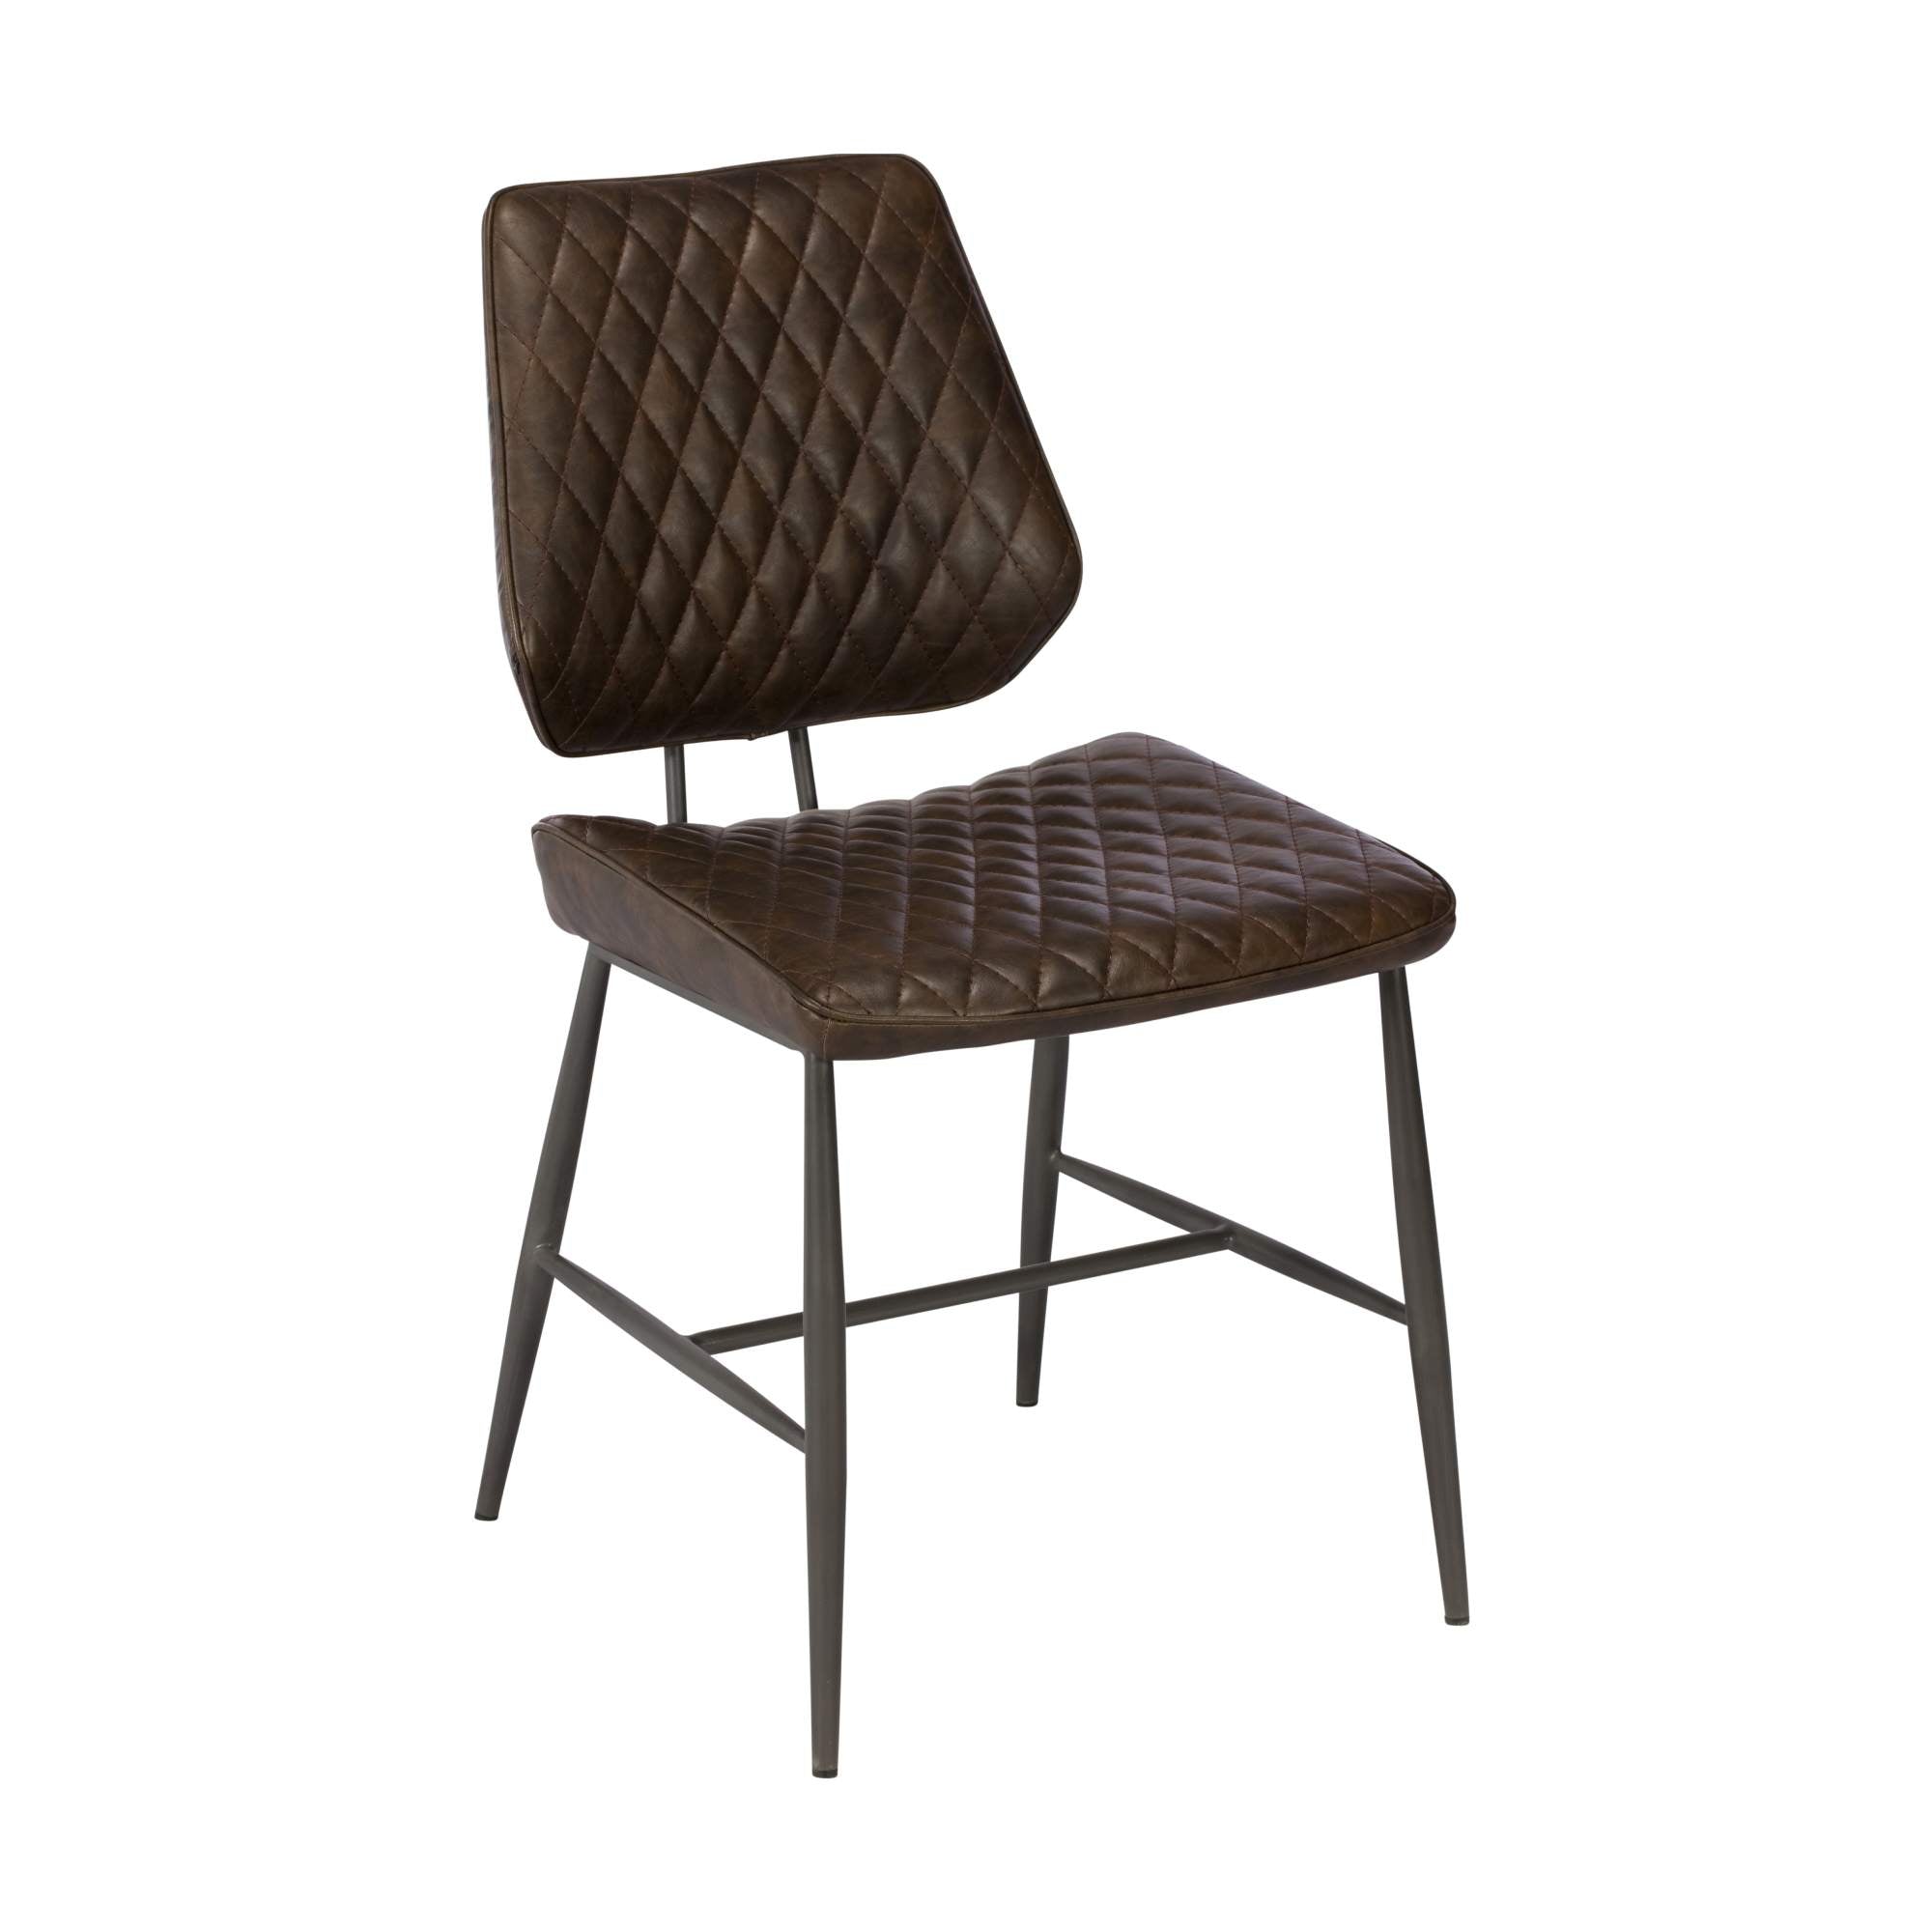 Dalton Dining Chair Brown | faux leather upholstery